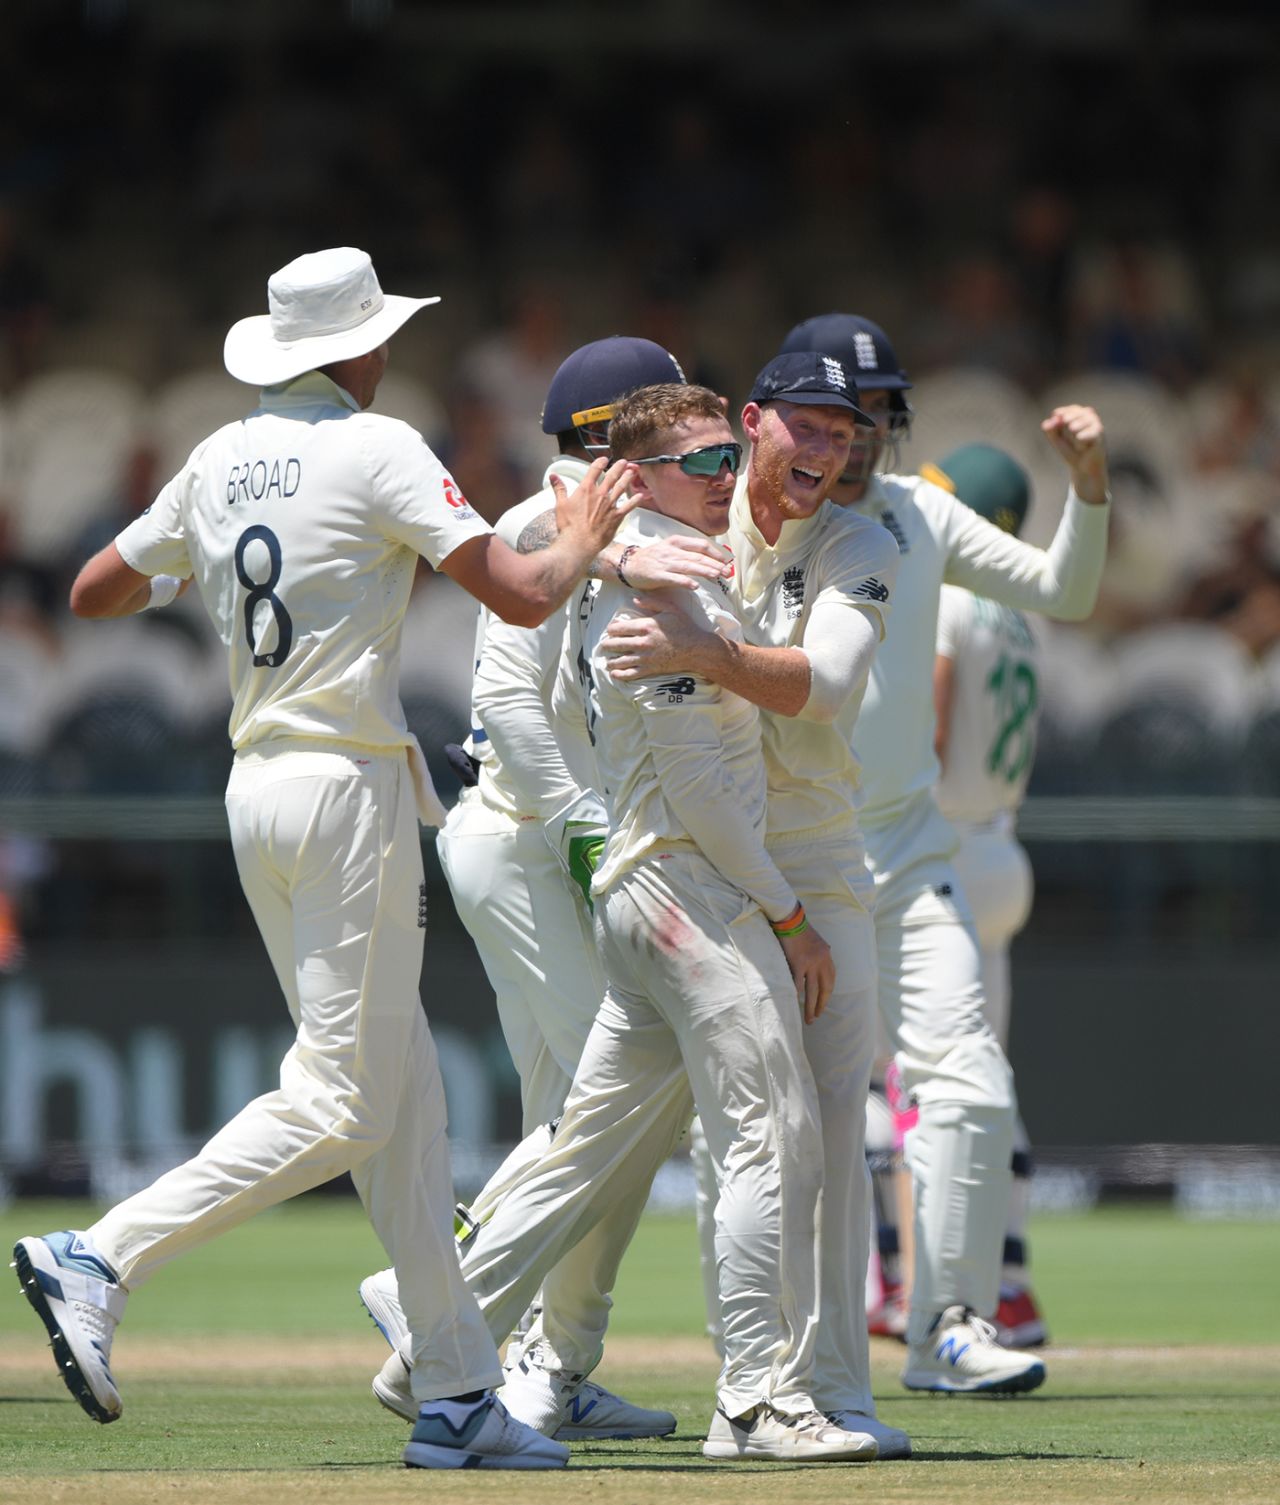 Dom Bess celebrates the wicket of Faf du Plessis, South Africa v England, 2nd Test, Cape Town, 5th day, January 7, 2020